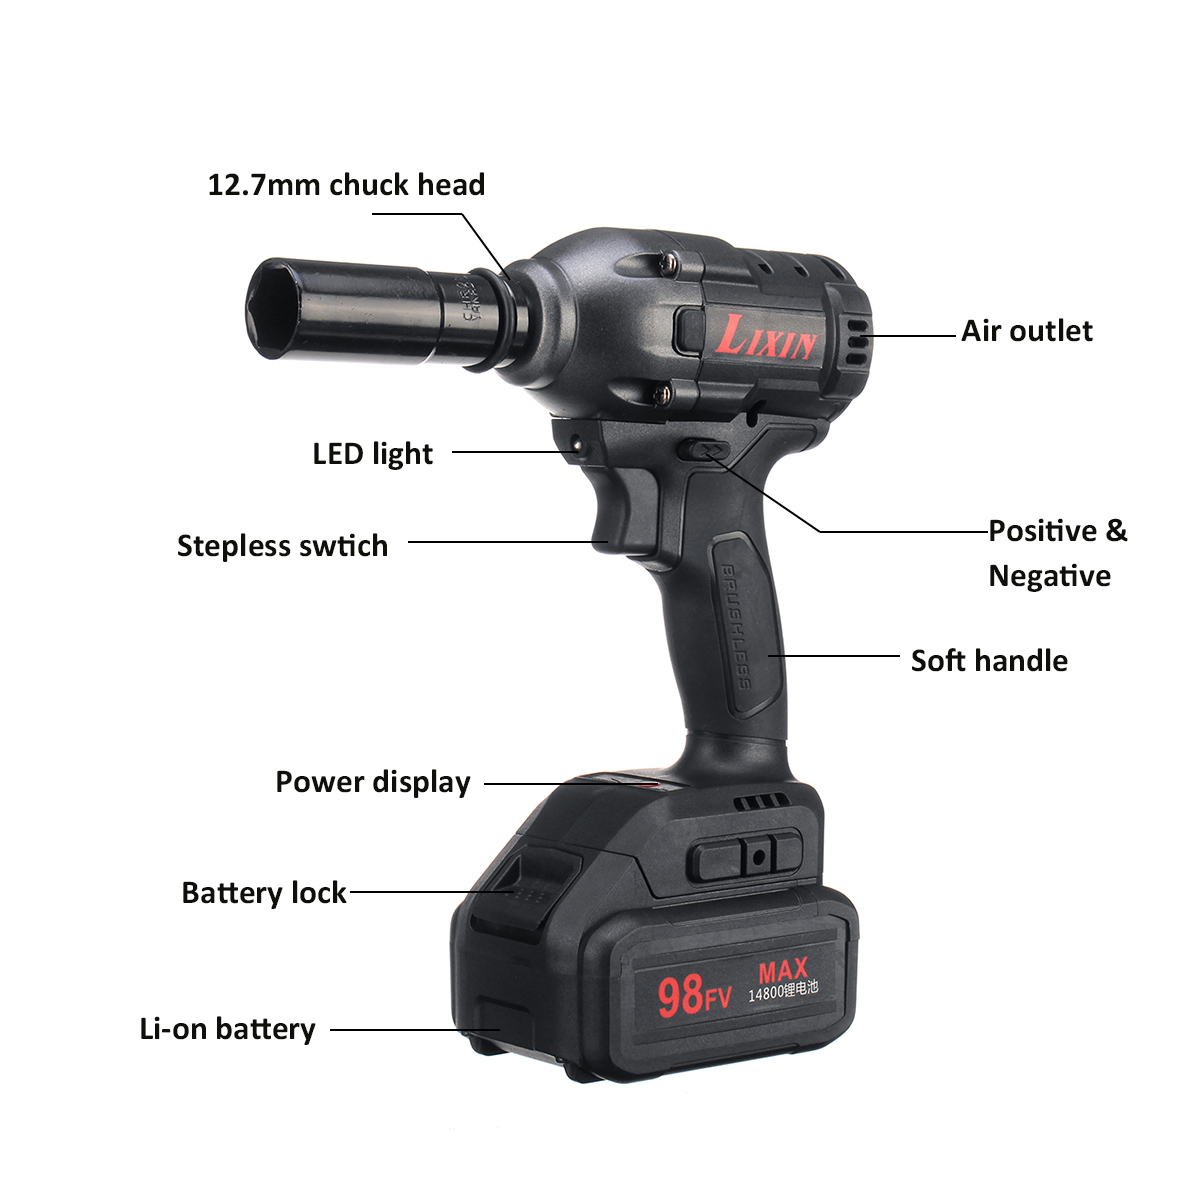 98FV 14800mAh Cordless Brushless Electric Wrench Drill LED Light W/ 1 or 2 Li-on Battery 29